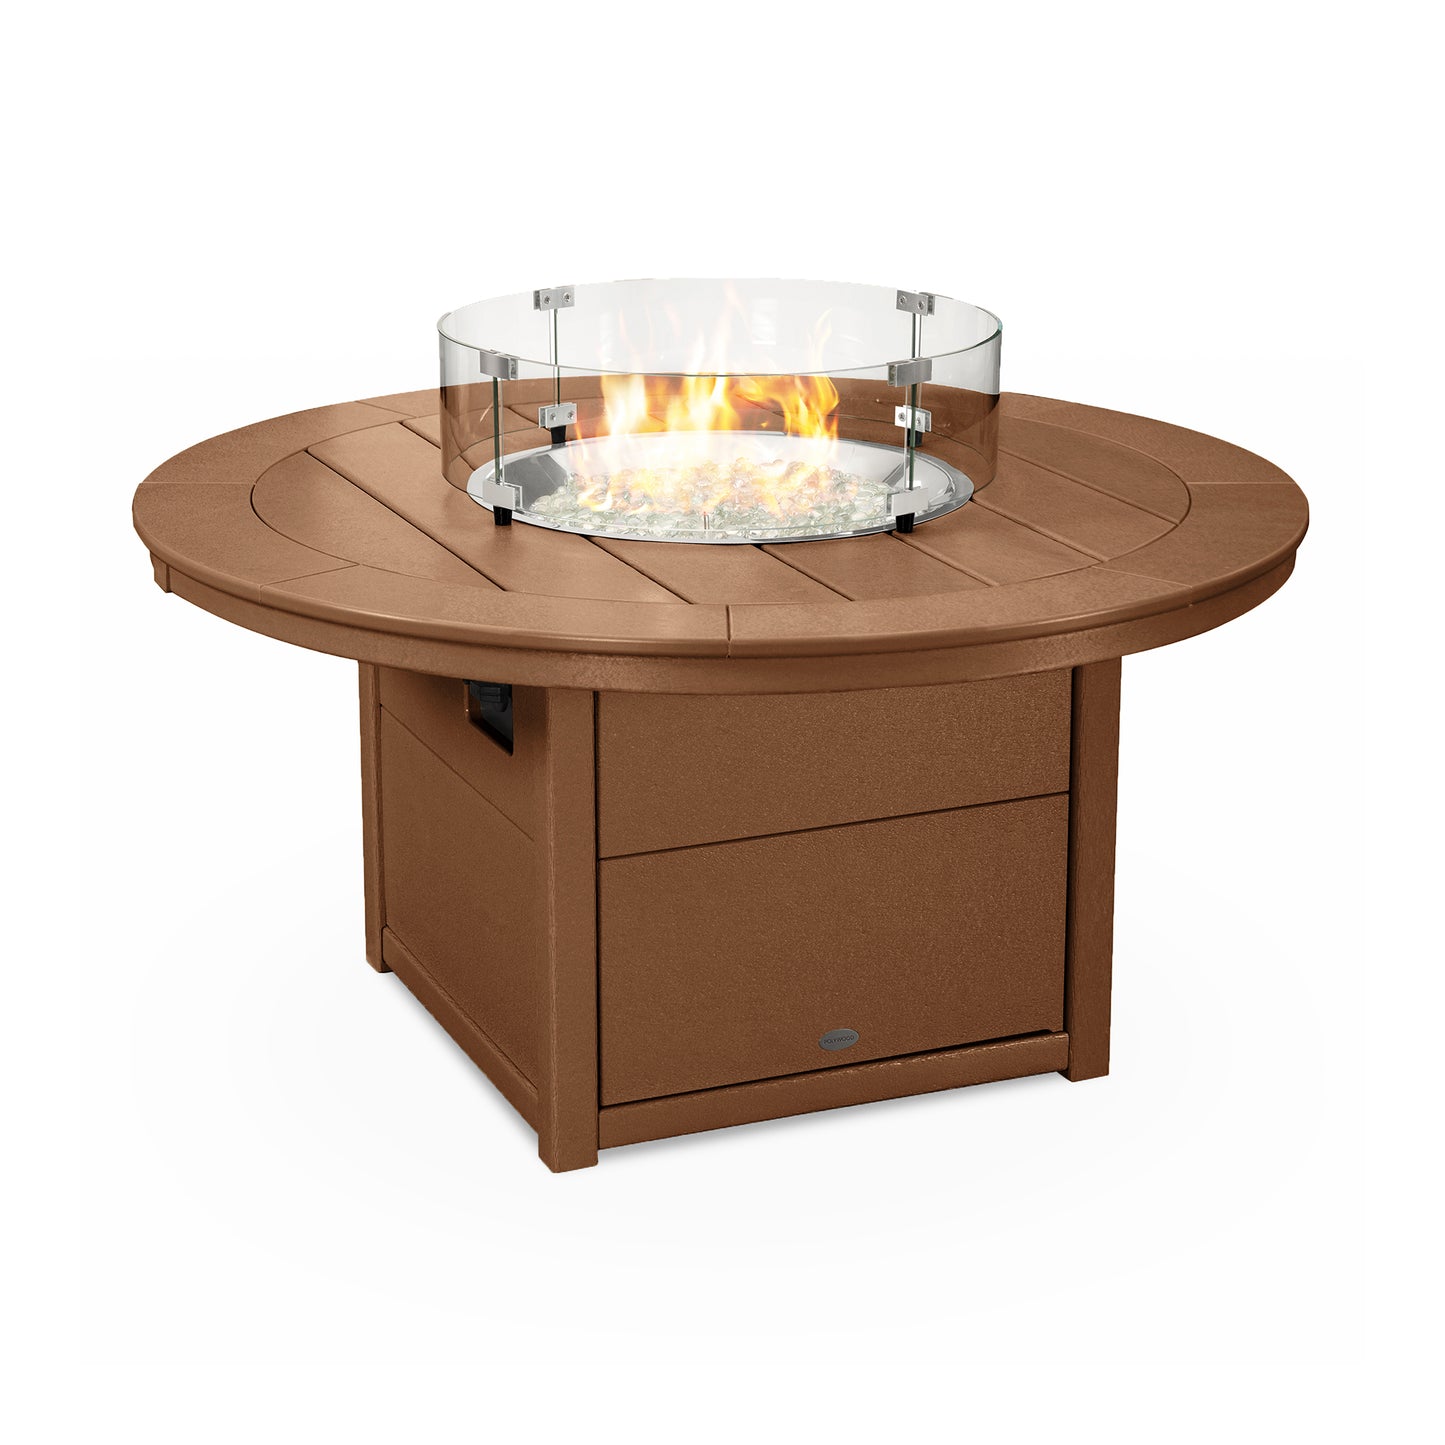 POLYWOOD Round 48" Fire Pit Table with a POLYWOOD® lumber base in a light brown color, featuring a glass wind guard. The fire is lit, showing orange flames over white fire glass beads.